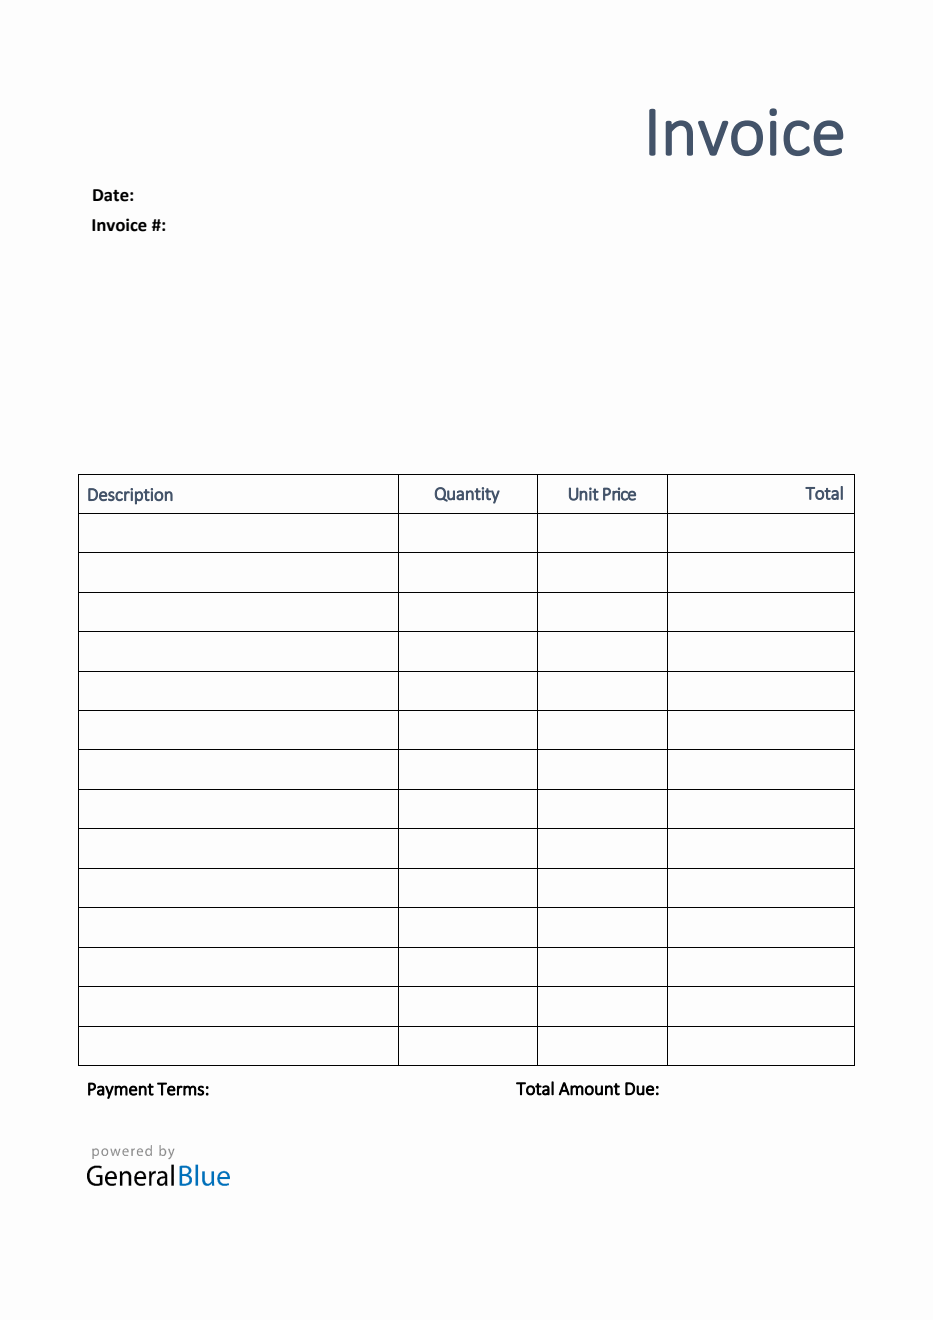 Invoice Template for U.K. in PDF (Printable) For Business Invoice Template Uk